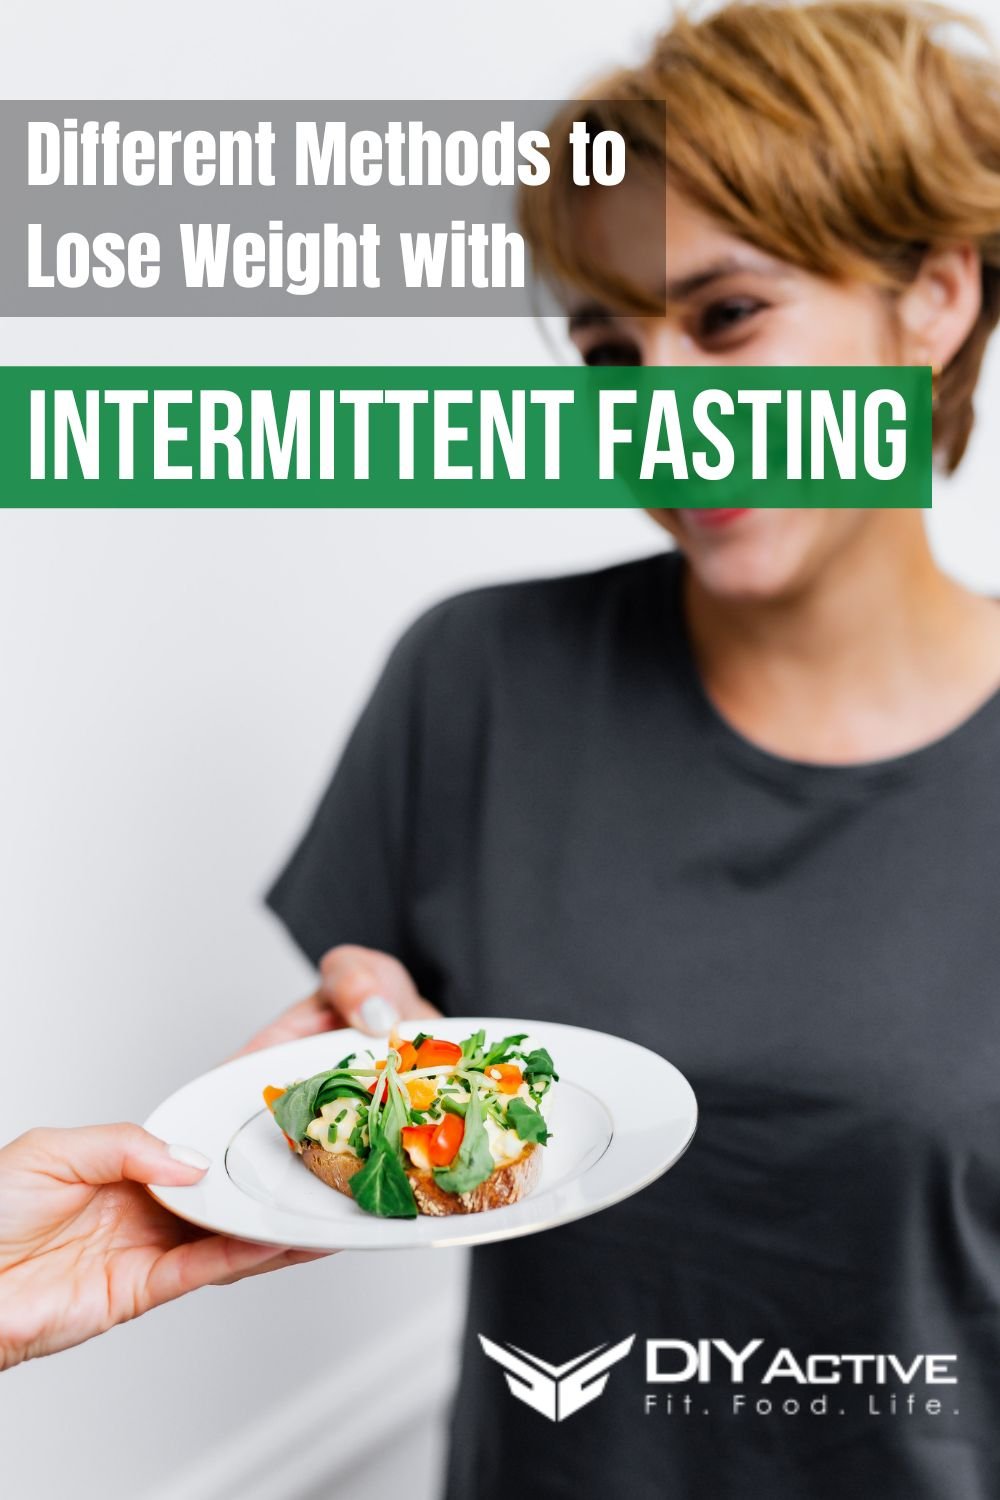 8 Different Methods to Lose Weight with Intermittent Fasting 2